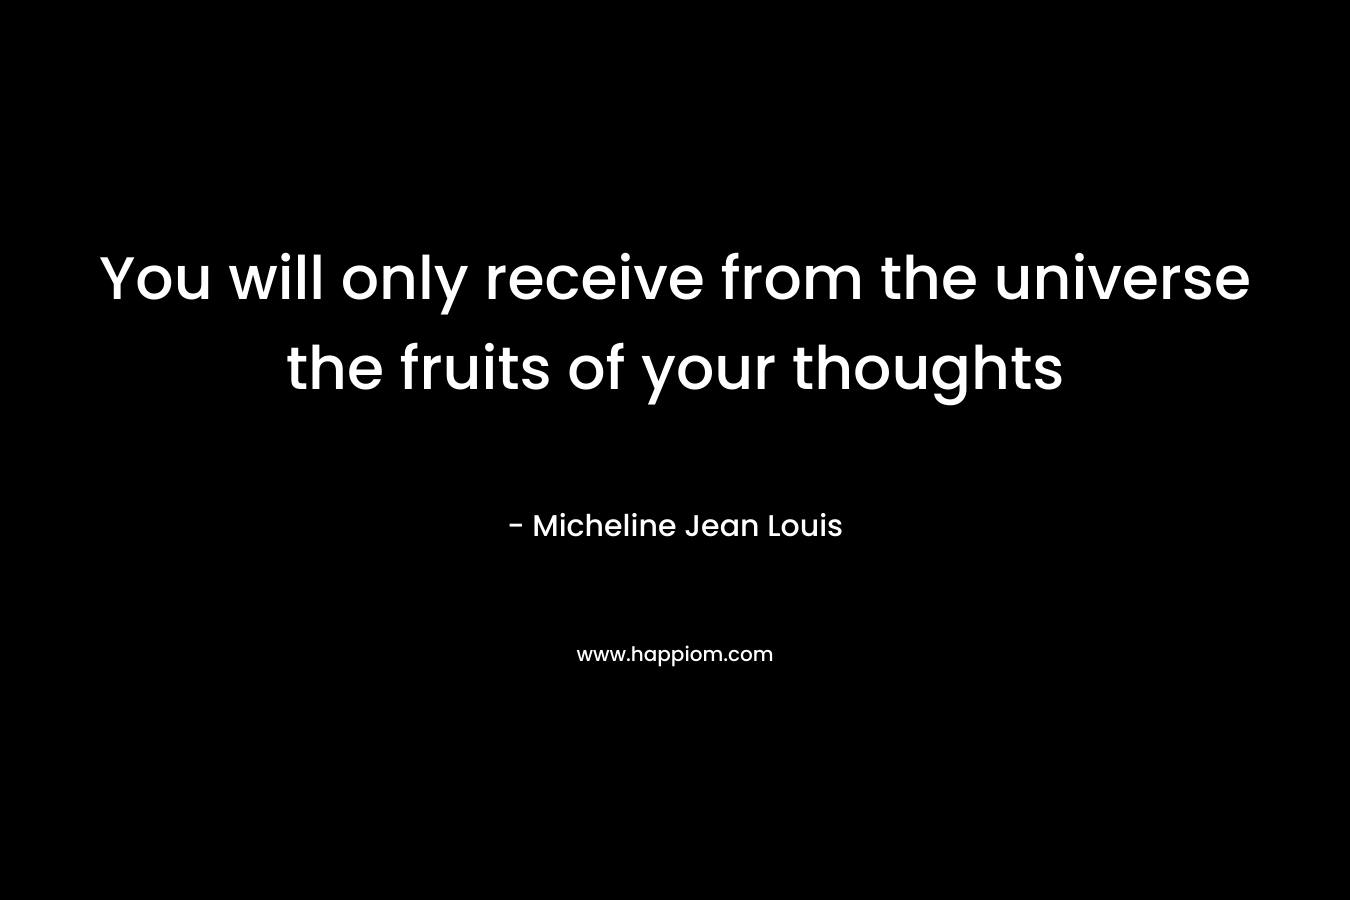 You will only receive from the universe the fruits of your thoughts – Micheline Jean Louis